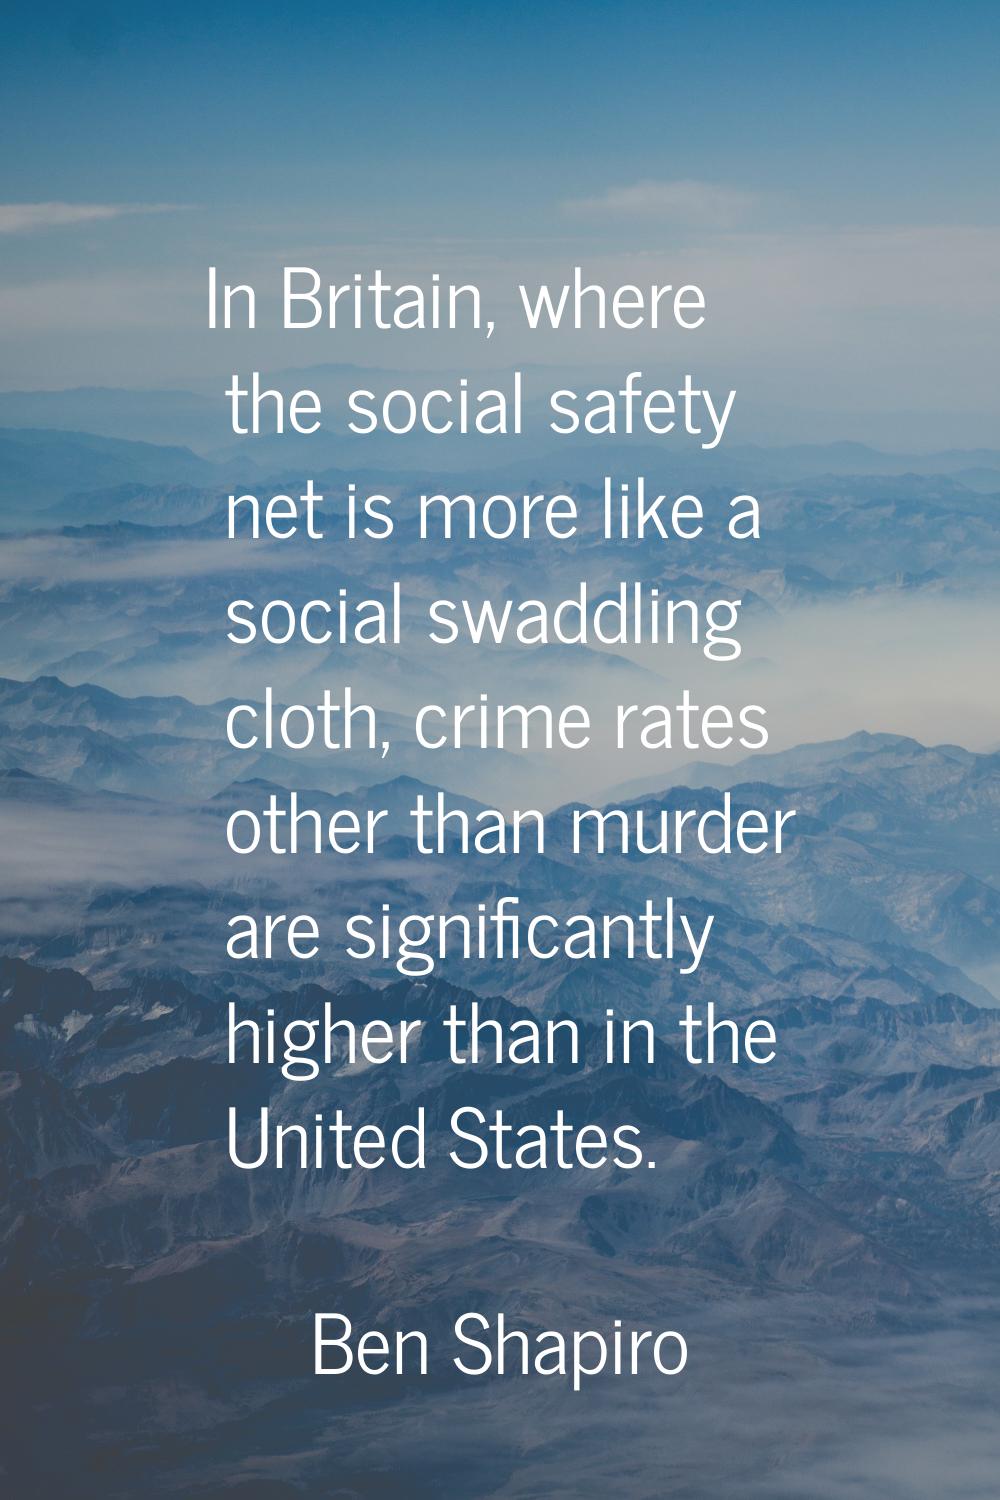 In Britain, where the social safety net is more like a social swaddling cloth, crime rates other th